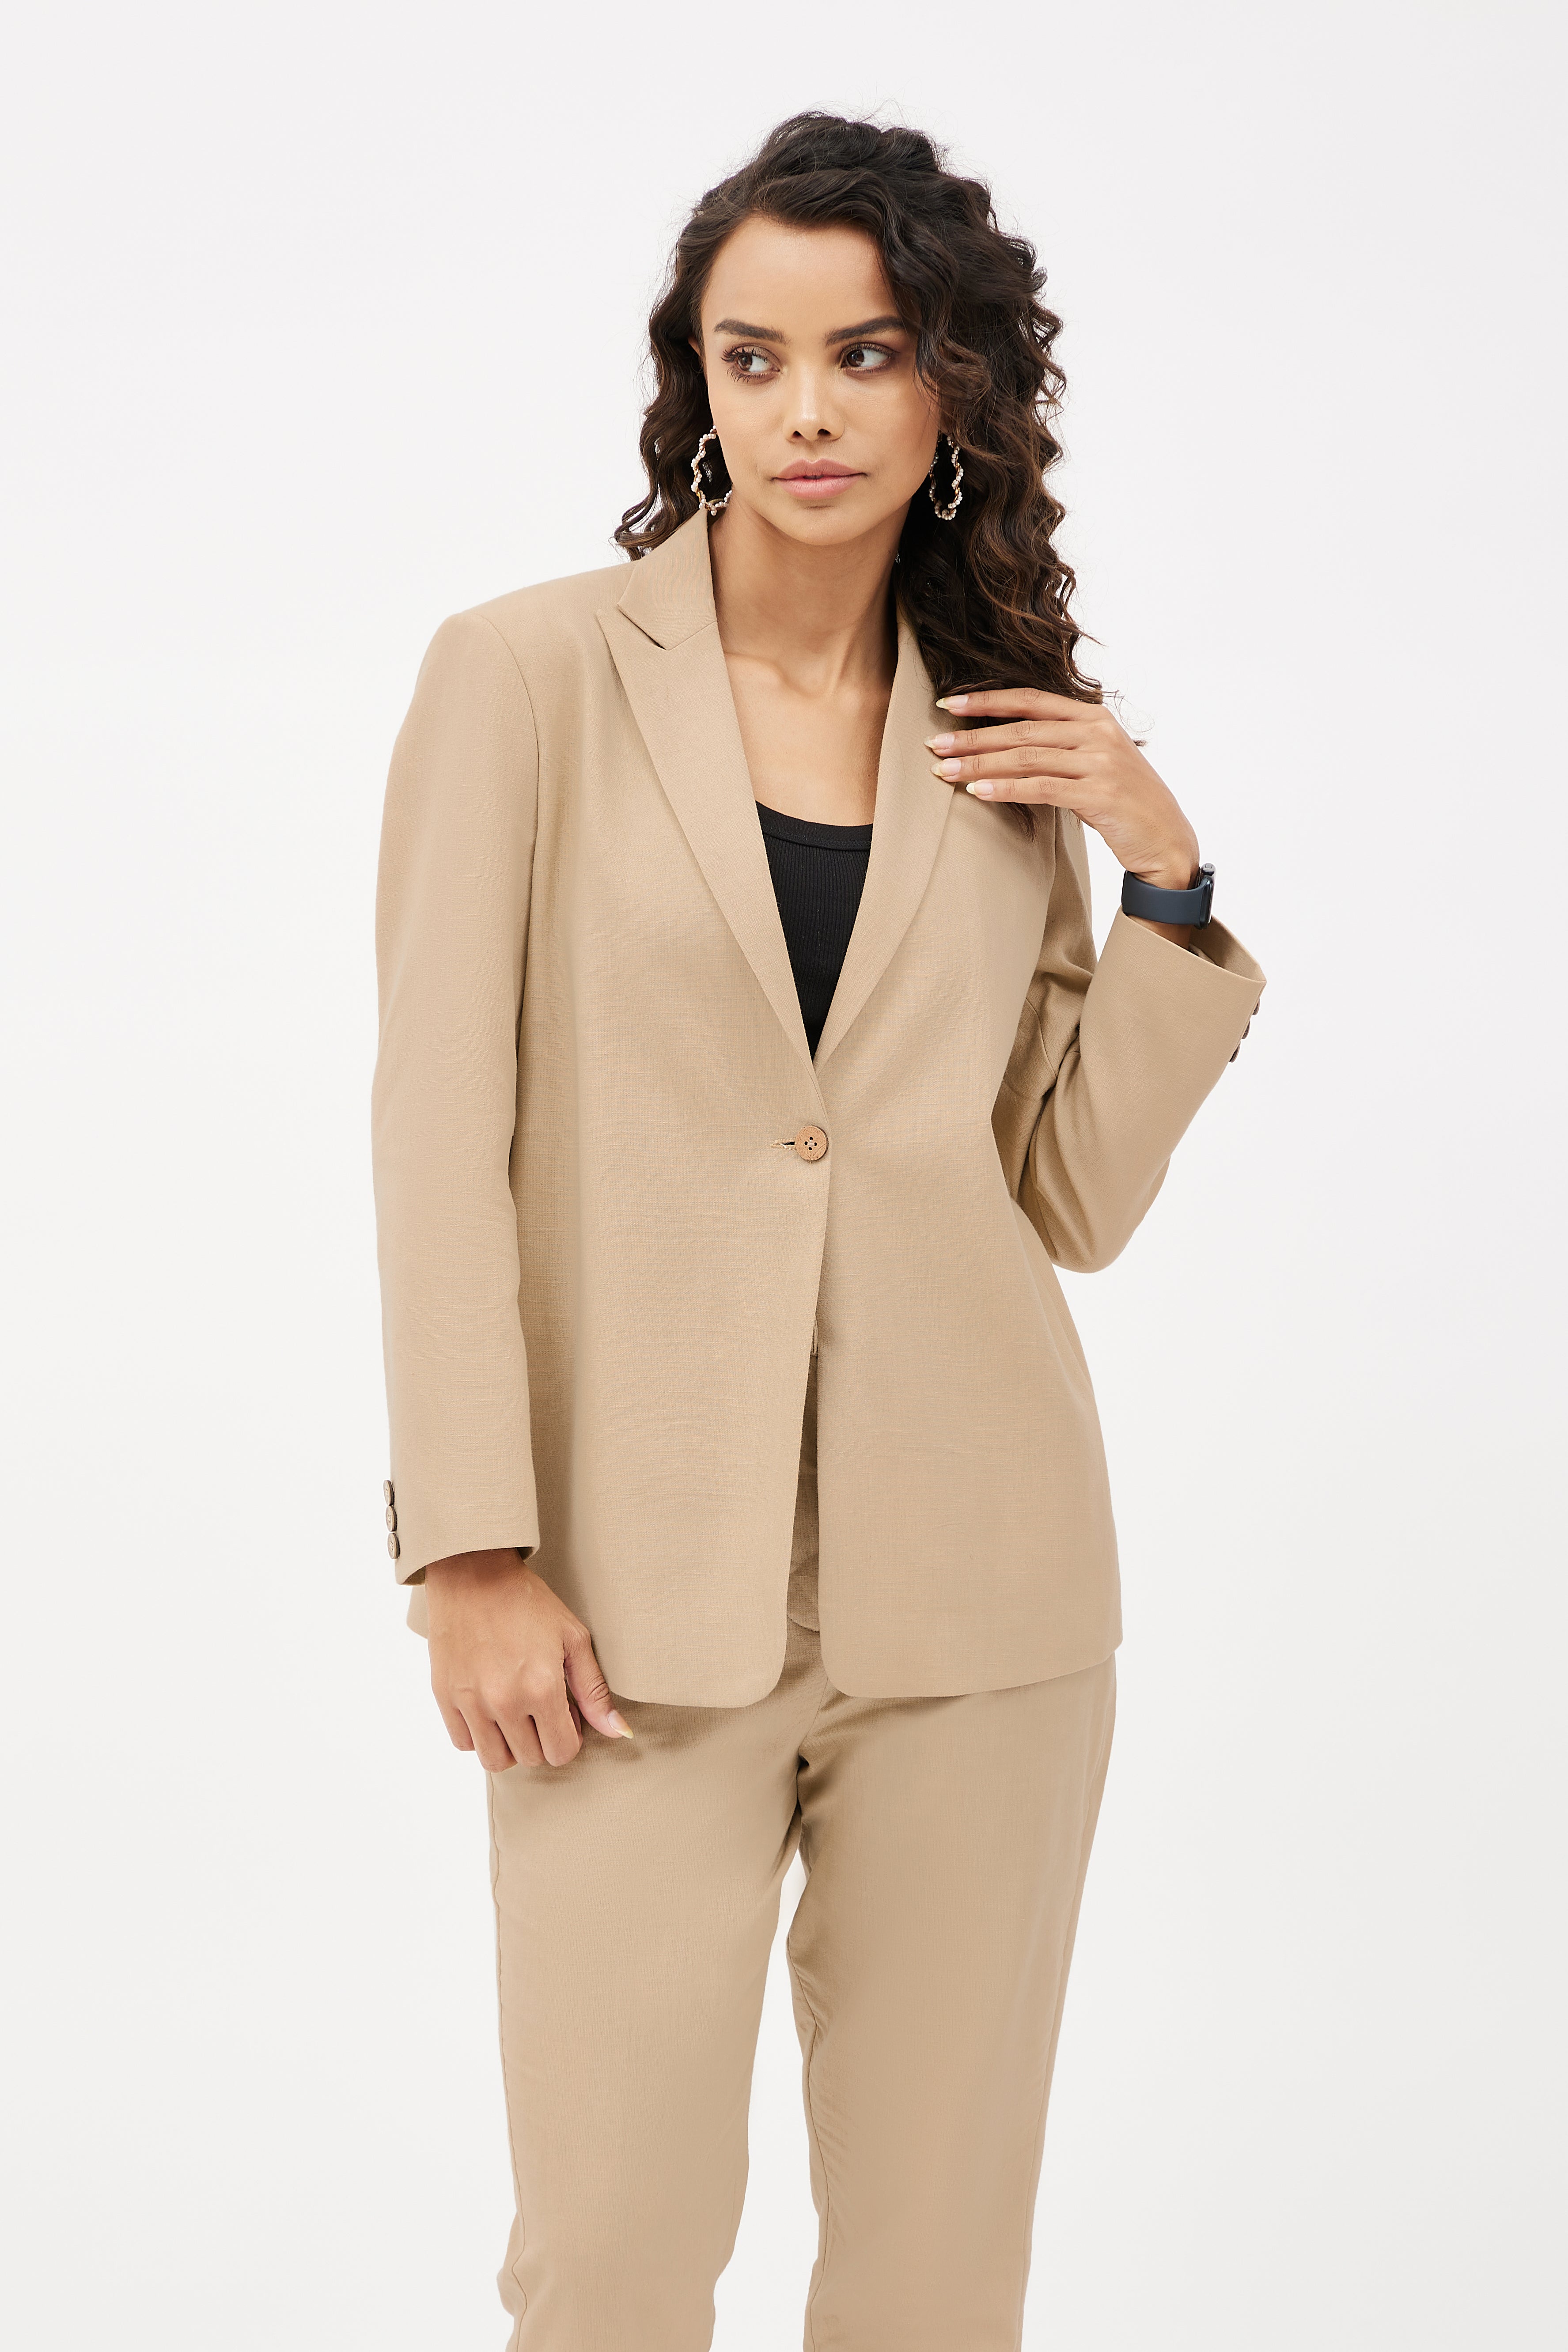 Buy BEFORE COLLECTION Womens Formal Suit with Blazer and Trouser of Same  Material Beigei Size SMLXLXXL at Amazonin